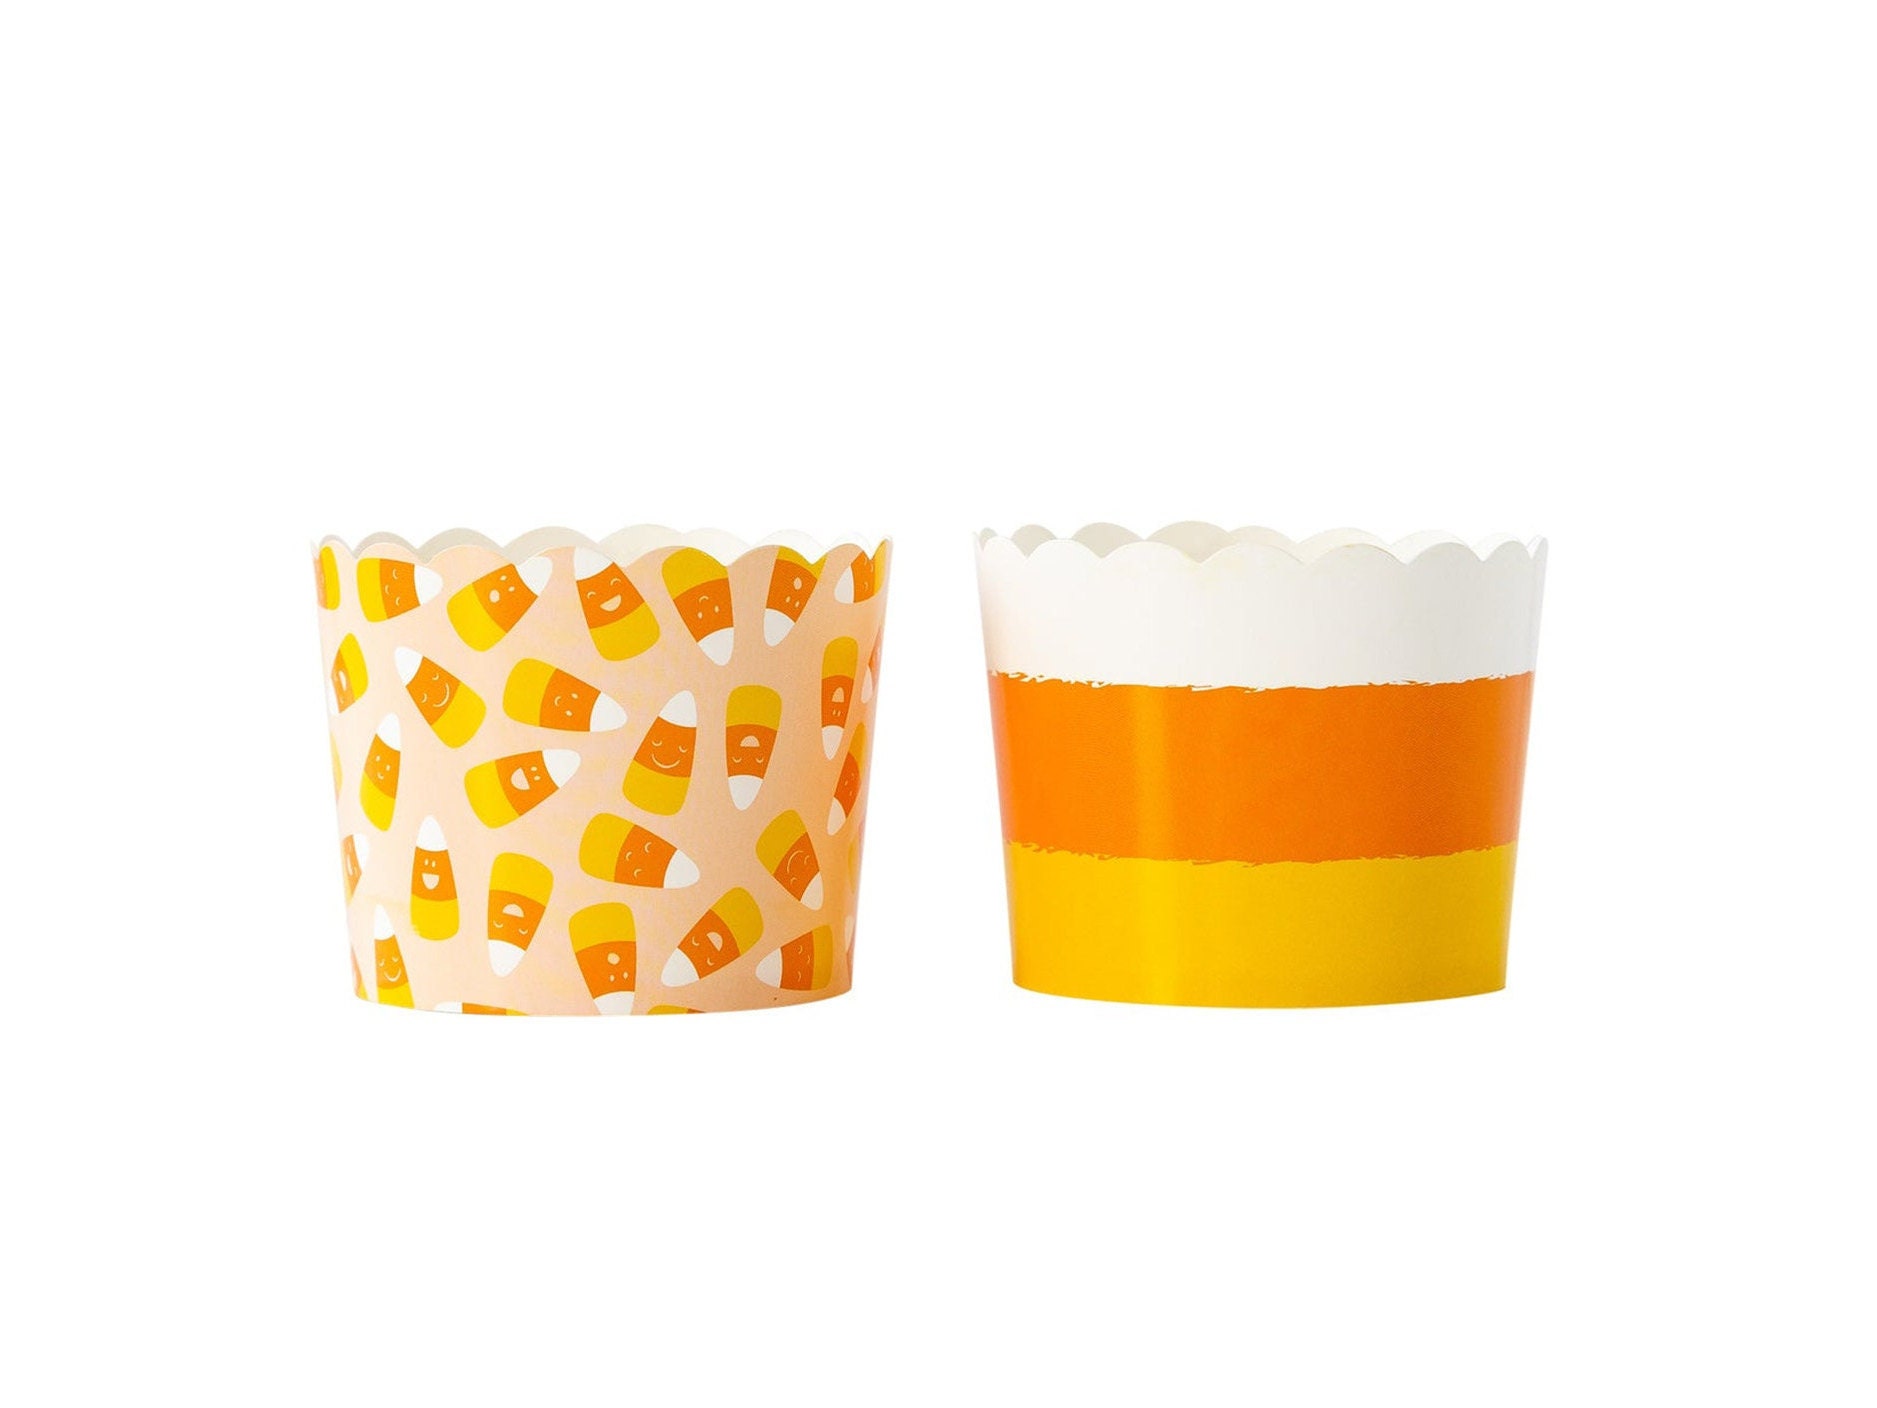 Fun Express Kids Wedding Cake Reusable Plastic Cups with Lids & Straws - 12 ct, White